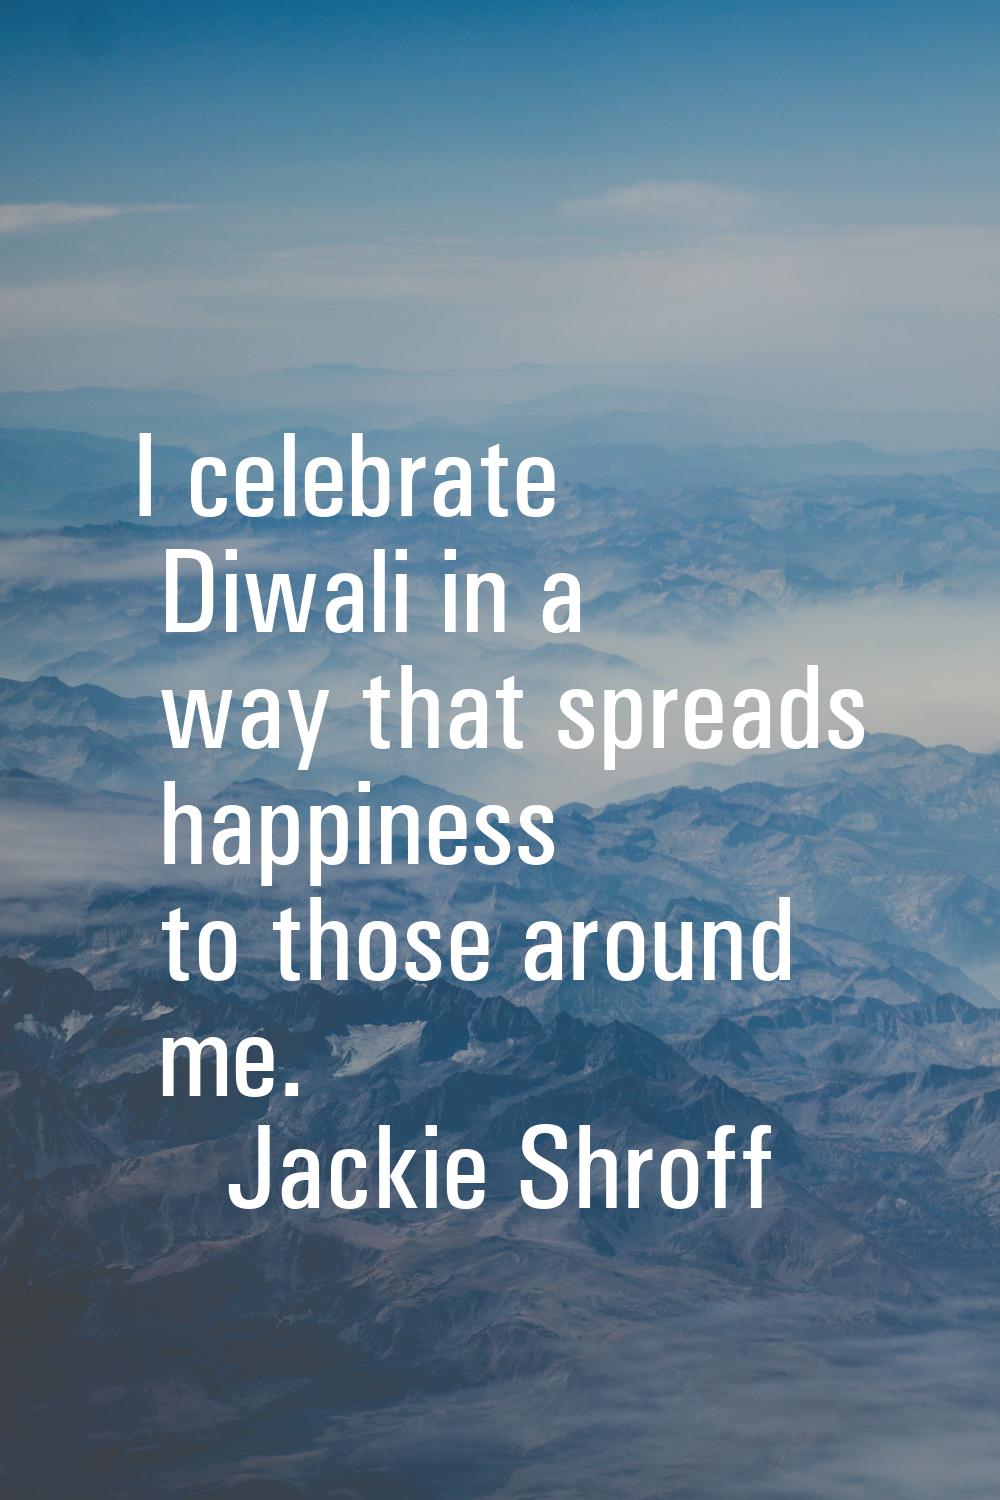 I celebrate Diwali in a way that spreads happiness to those around me.